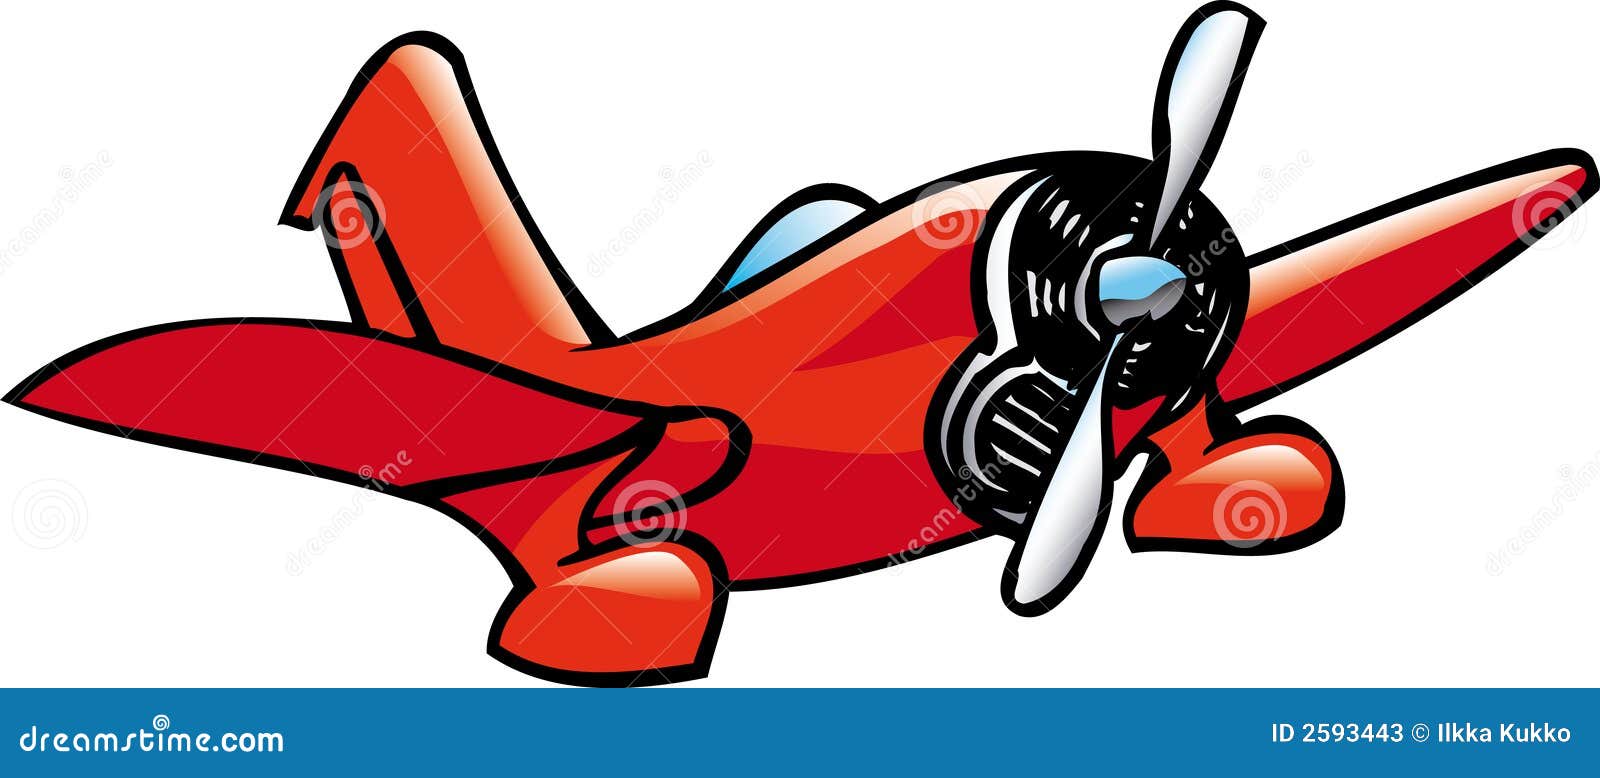 Red Airplane Cartoon Stock Illustrations – 2,687 Red Airplane Cartoon Stock  Illustrations, Vectors & Clipart - Dreamstime